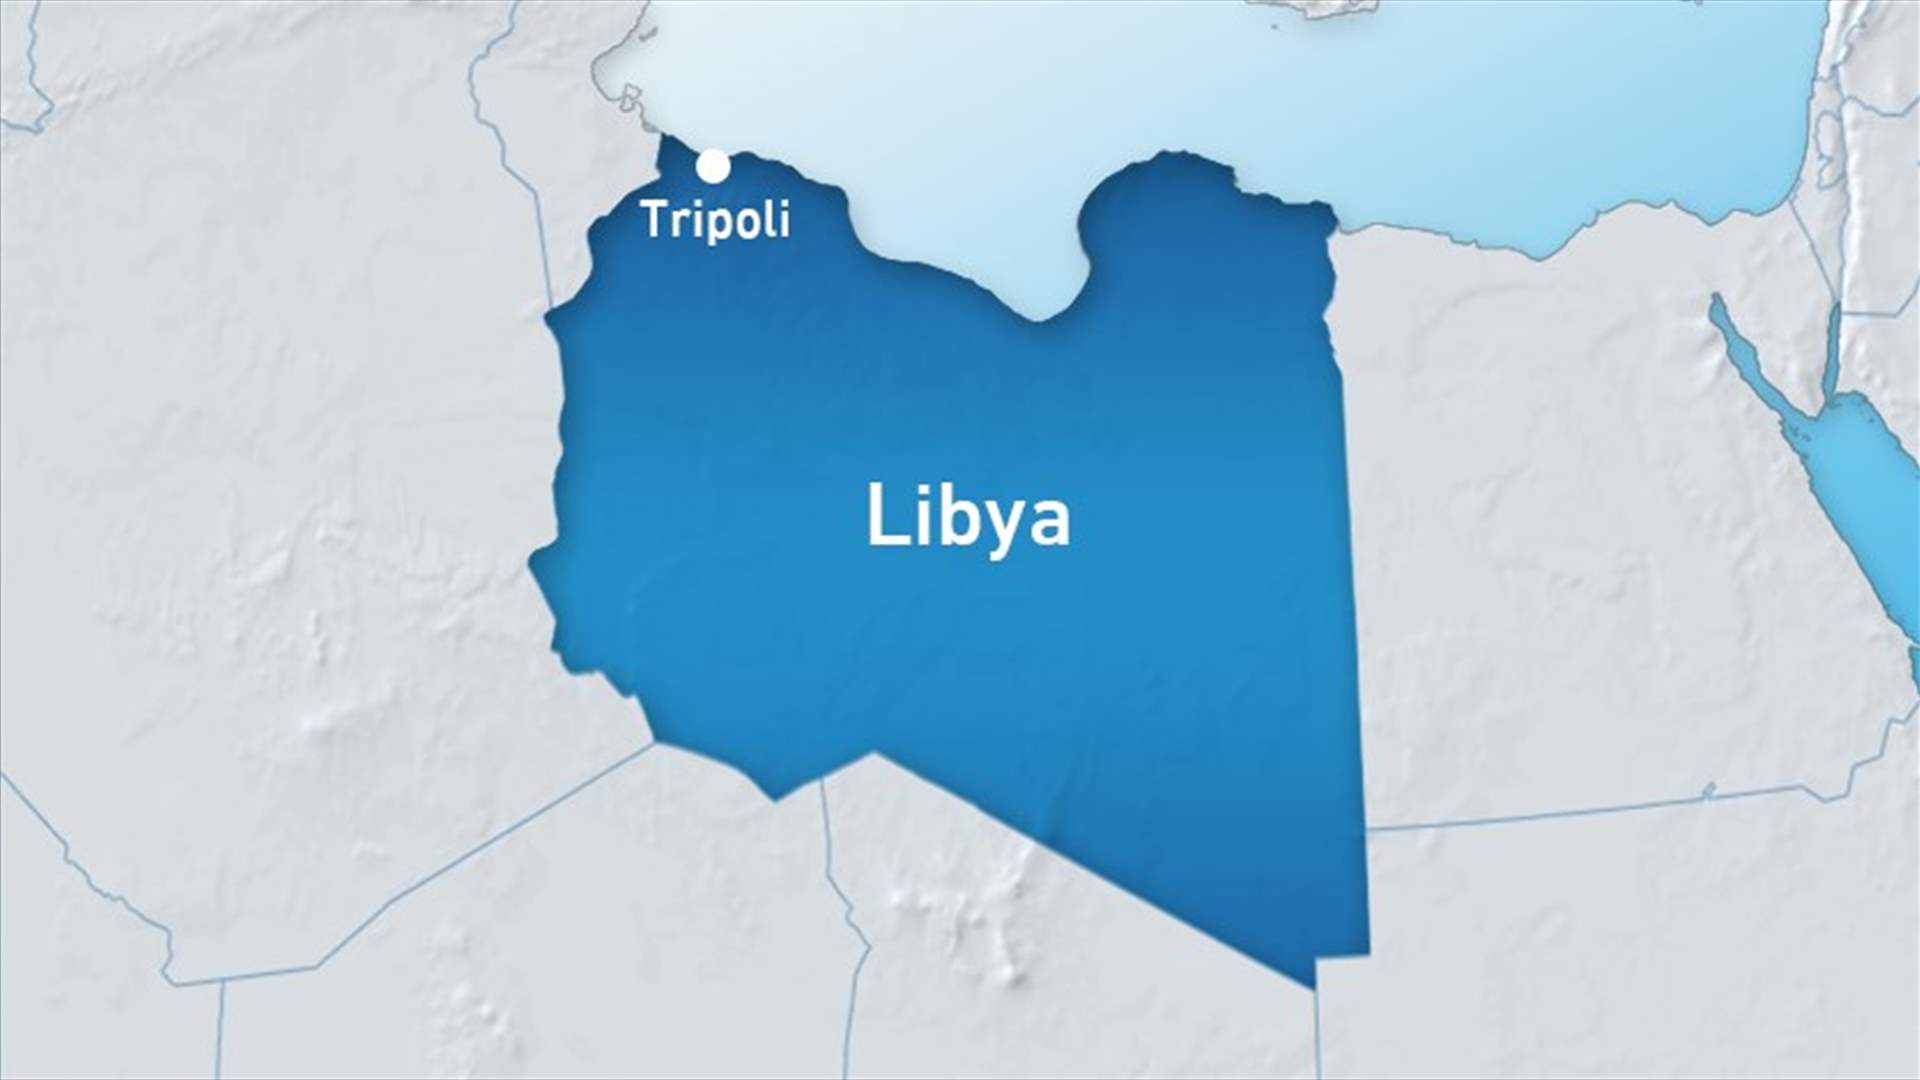 Six killed in bombing, clashes with militants in western Libya - officials